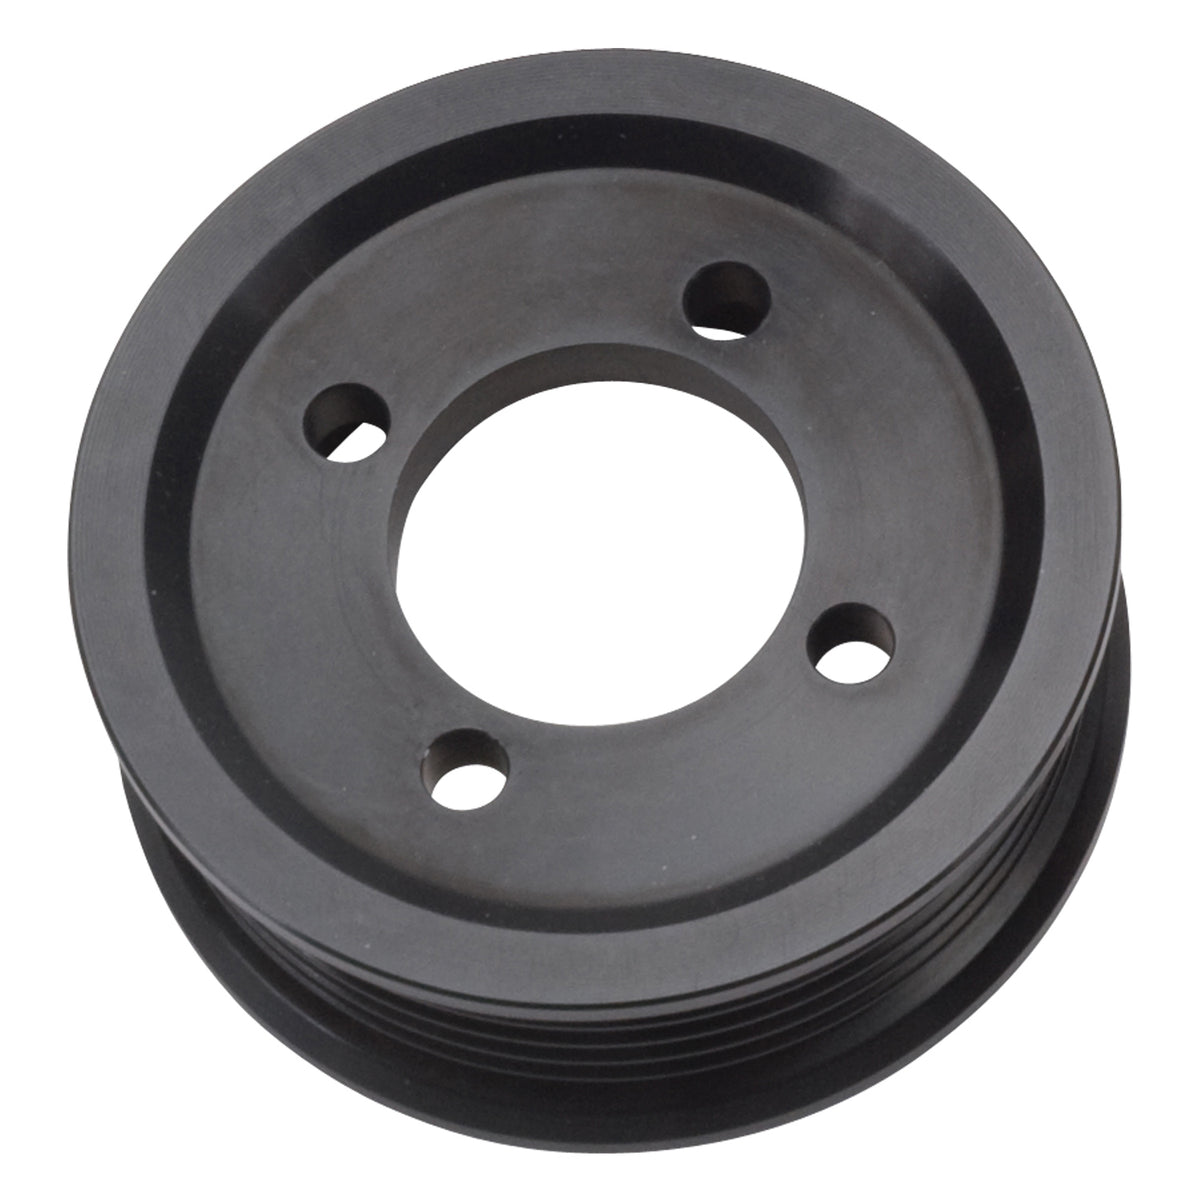 Edelbrock Competition Supercharger Pulley 3.00 In. 6-rib, Black Anodized - 15822